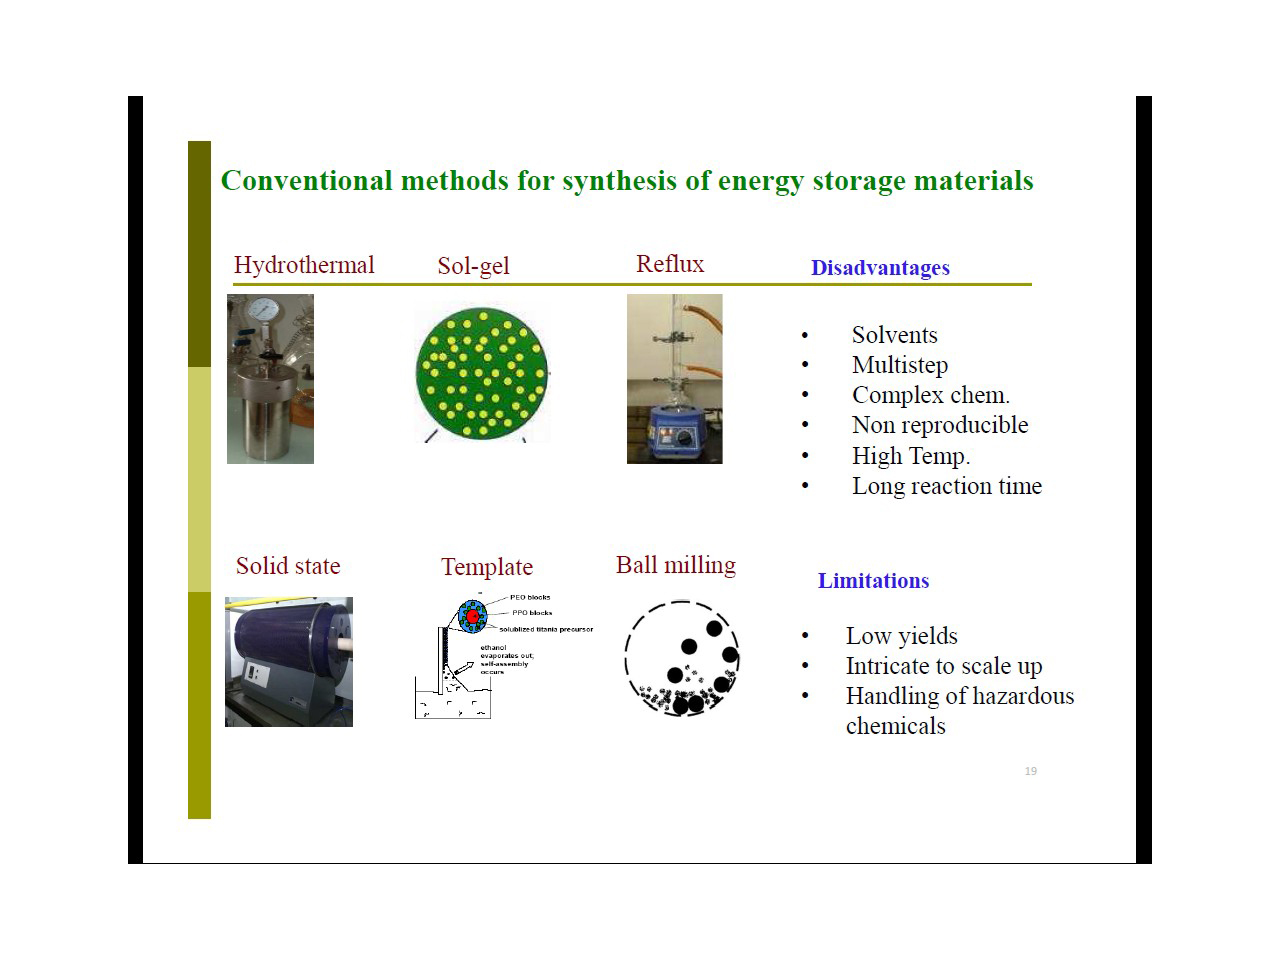 Conventional methods for synthesis of energy storage materials